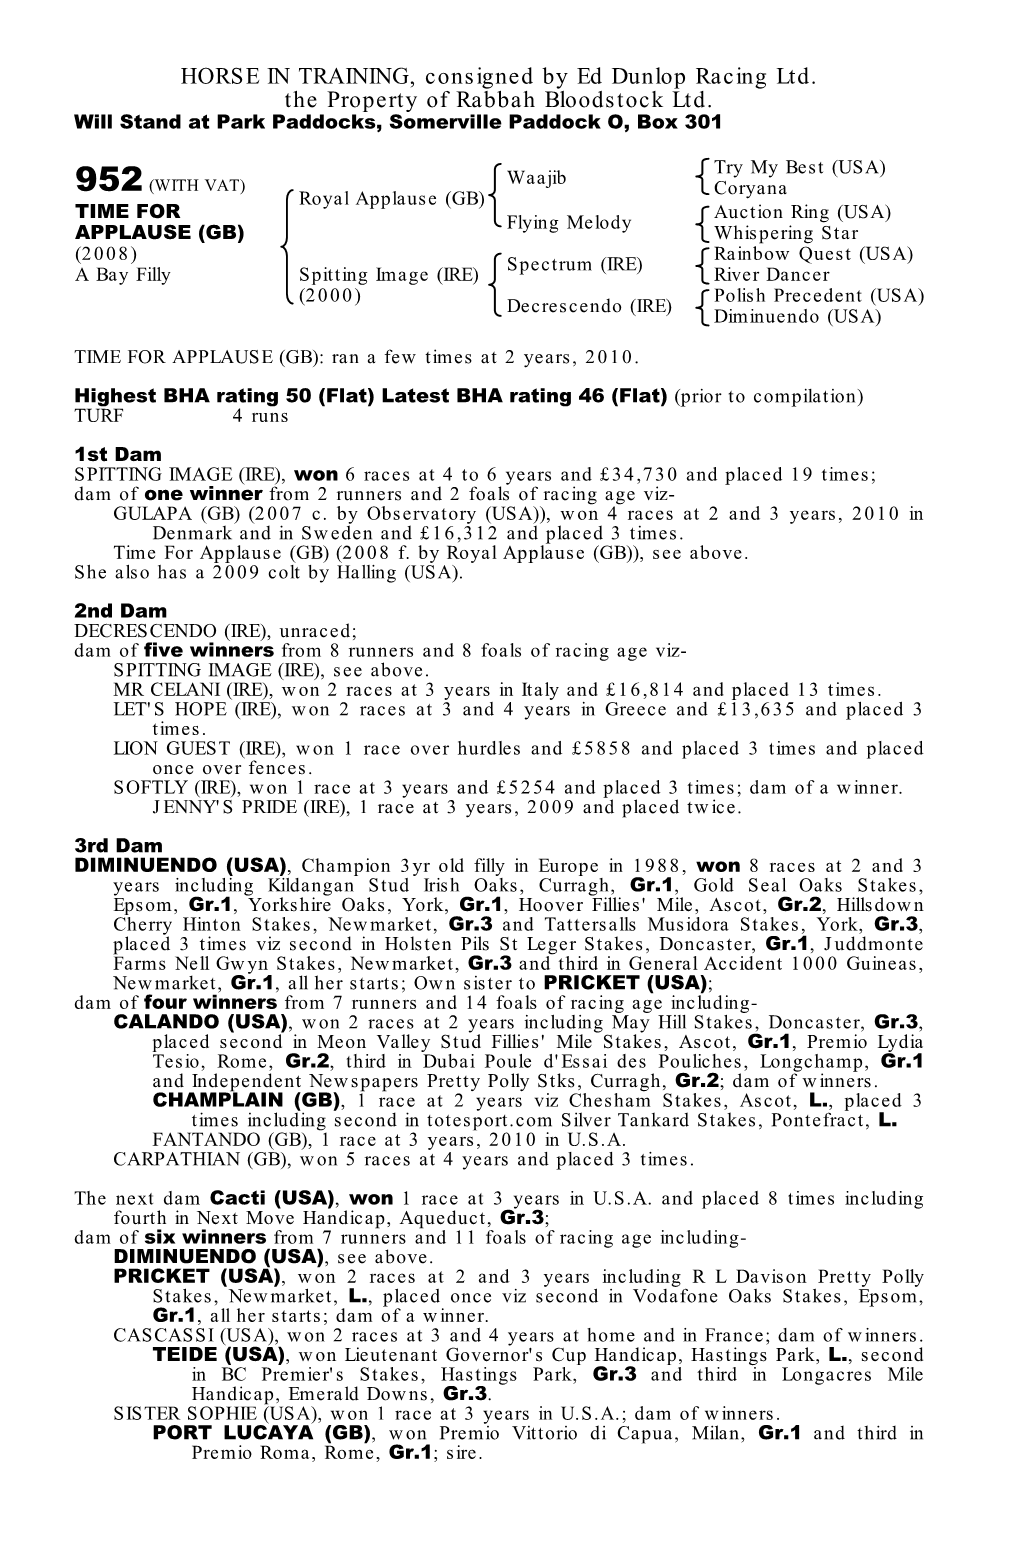 HORSE in TRAINING, Consigned by Conkwell Grange